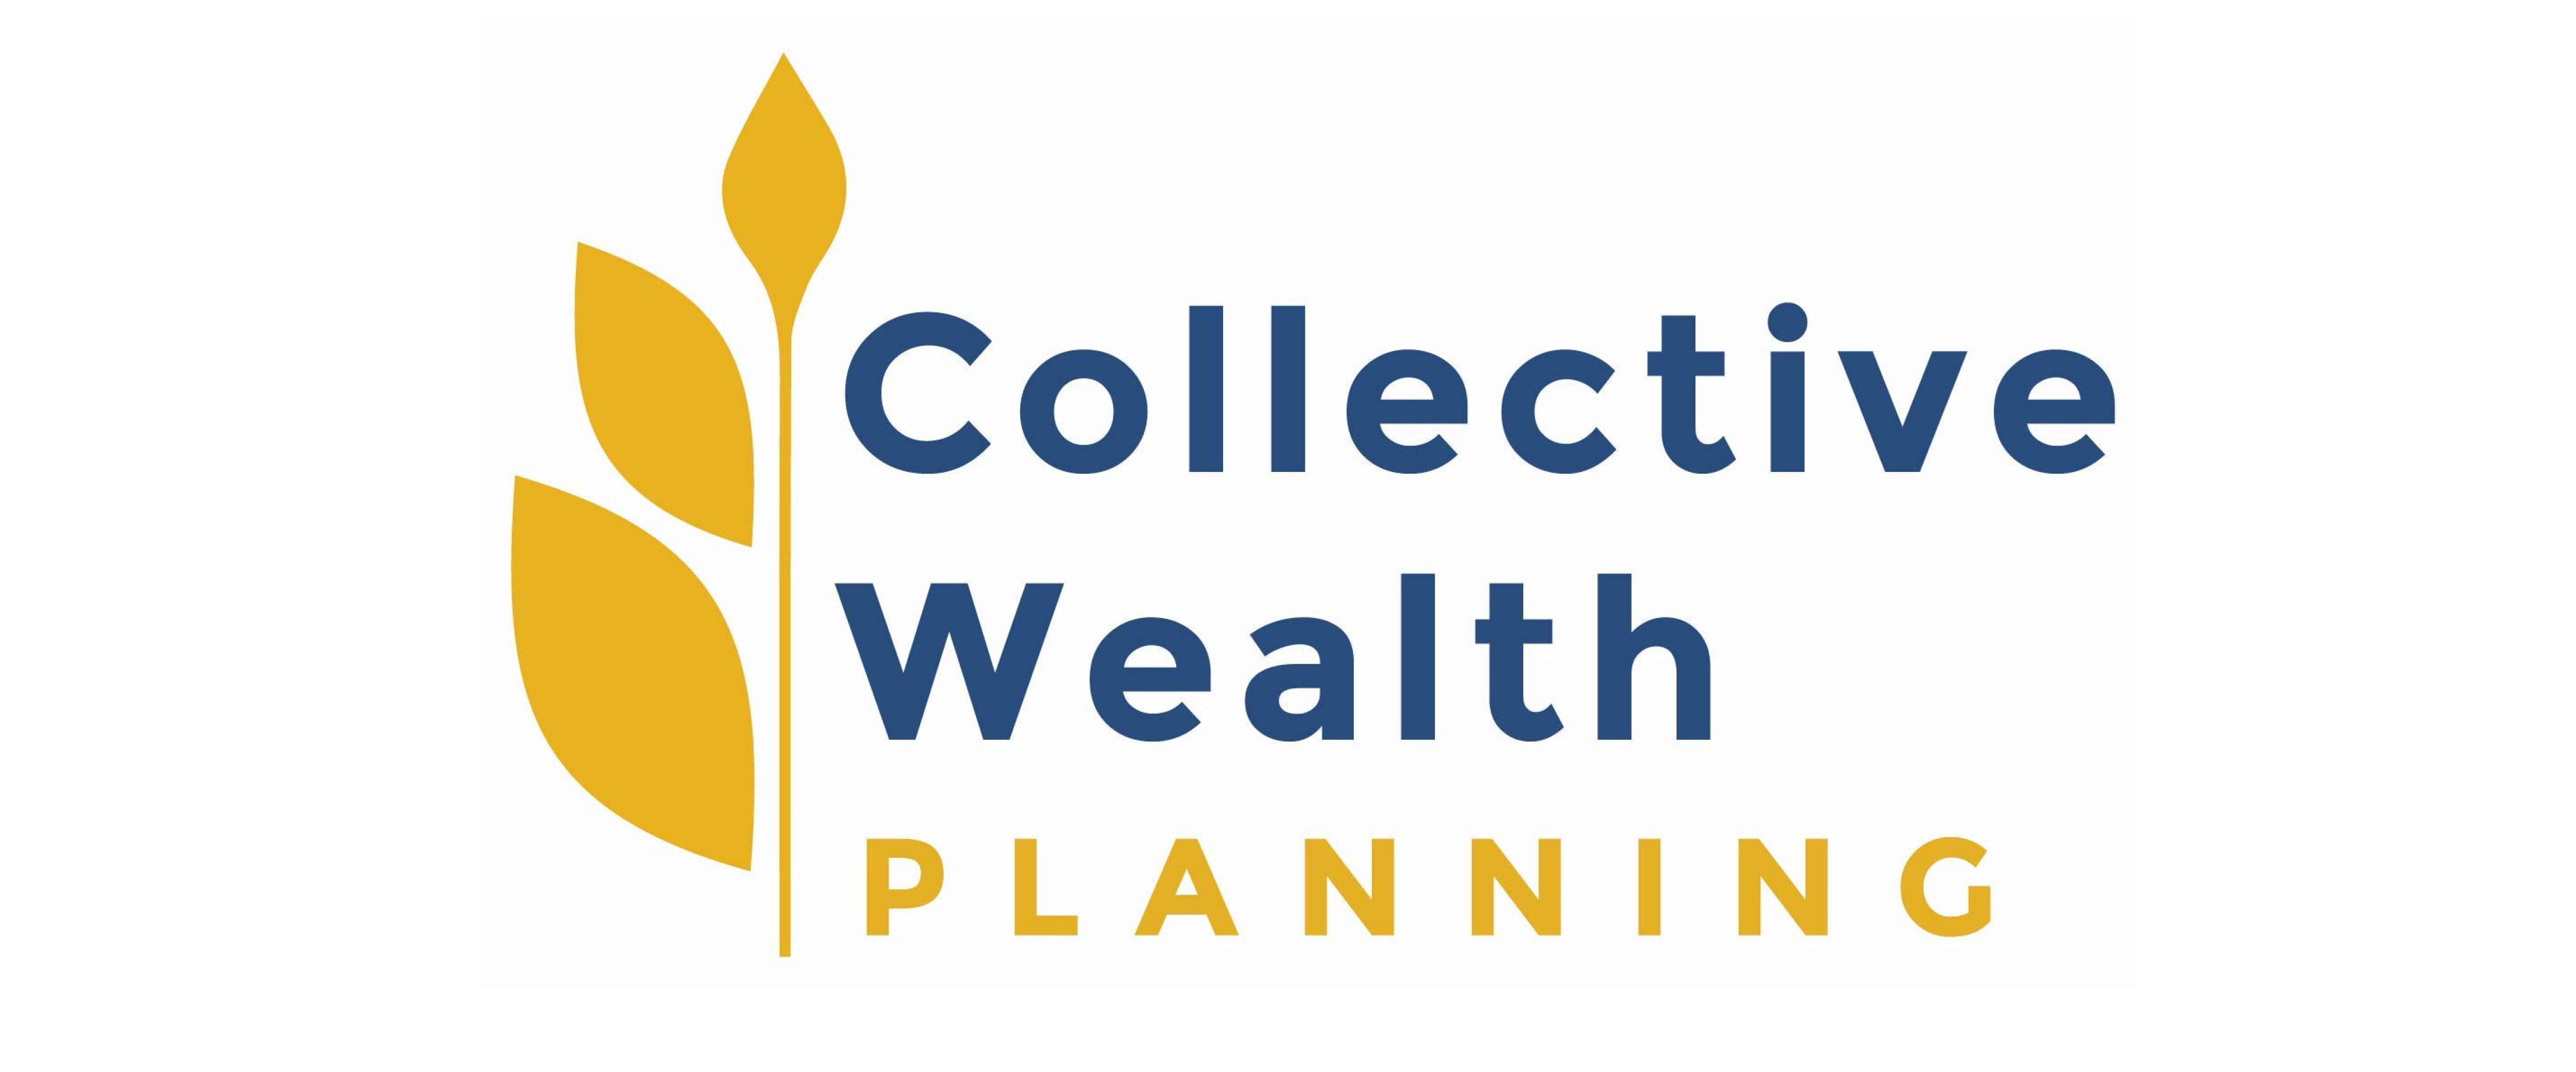 Collective Wealth Planning